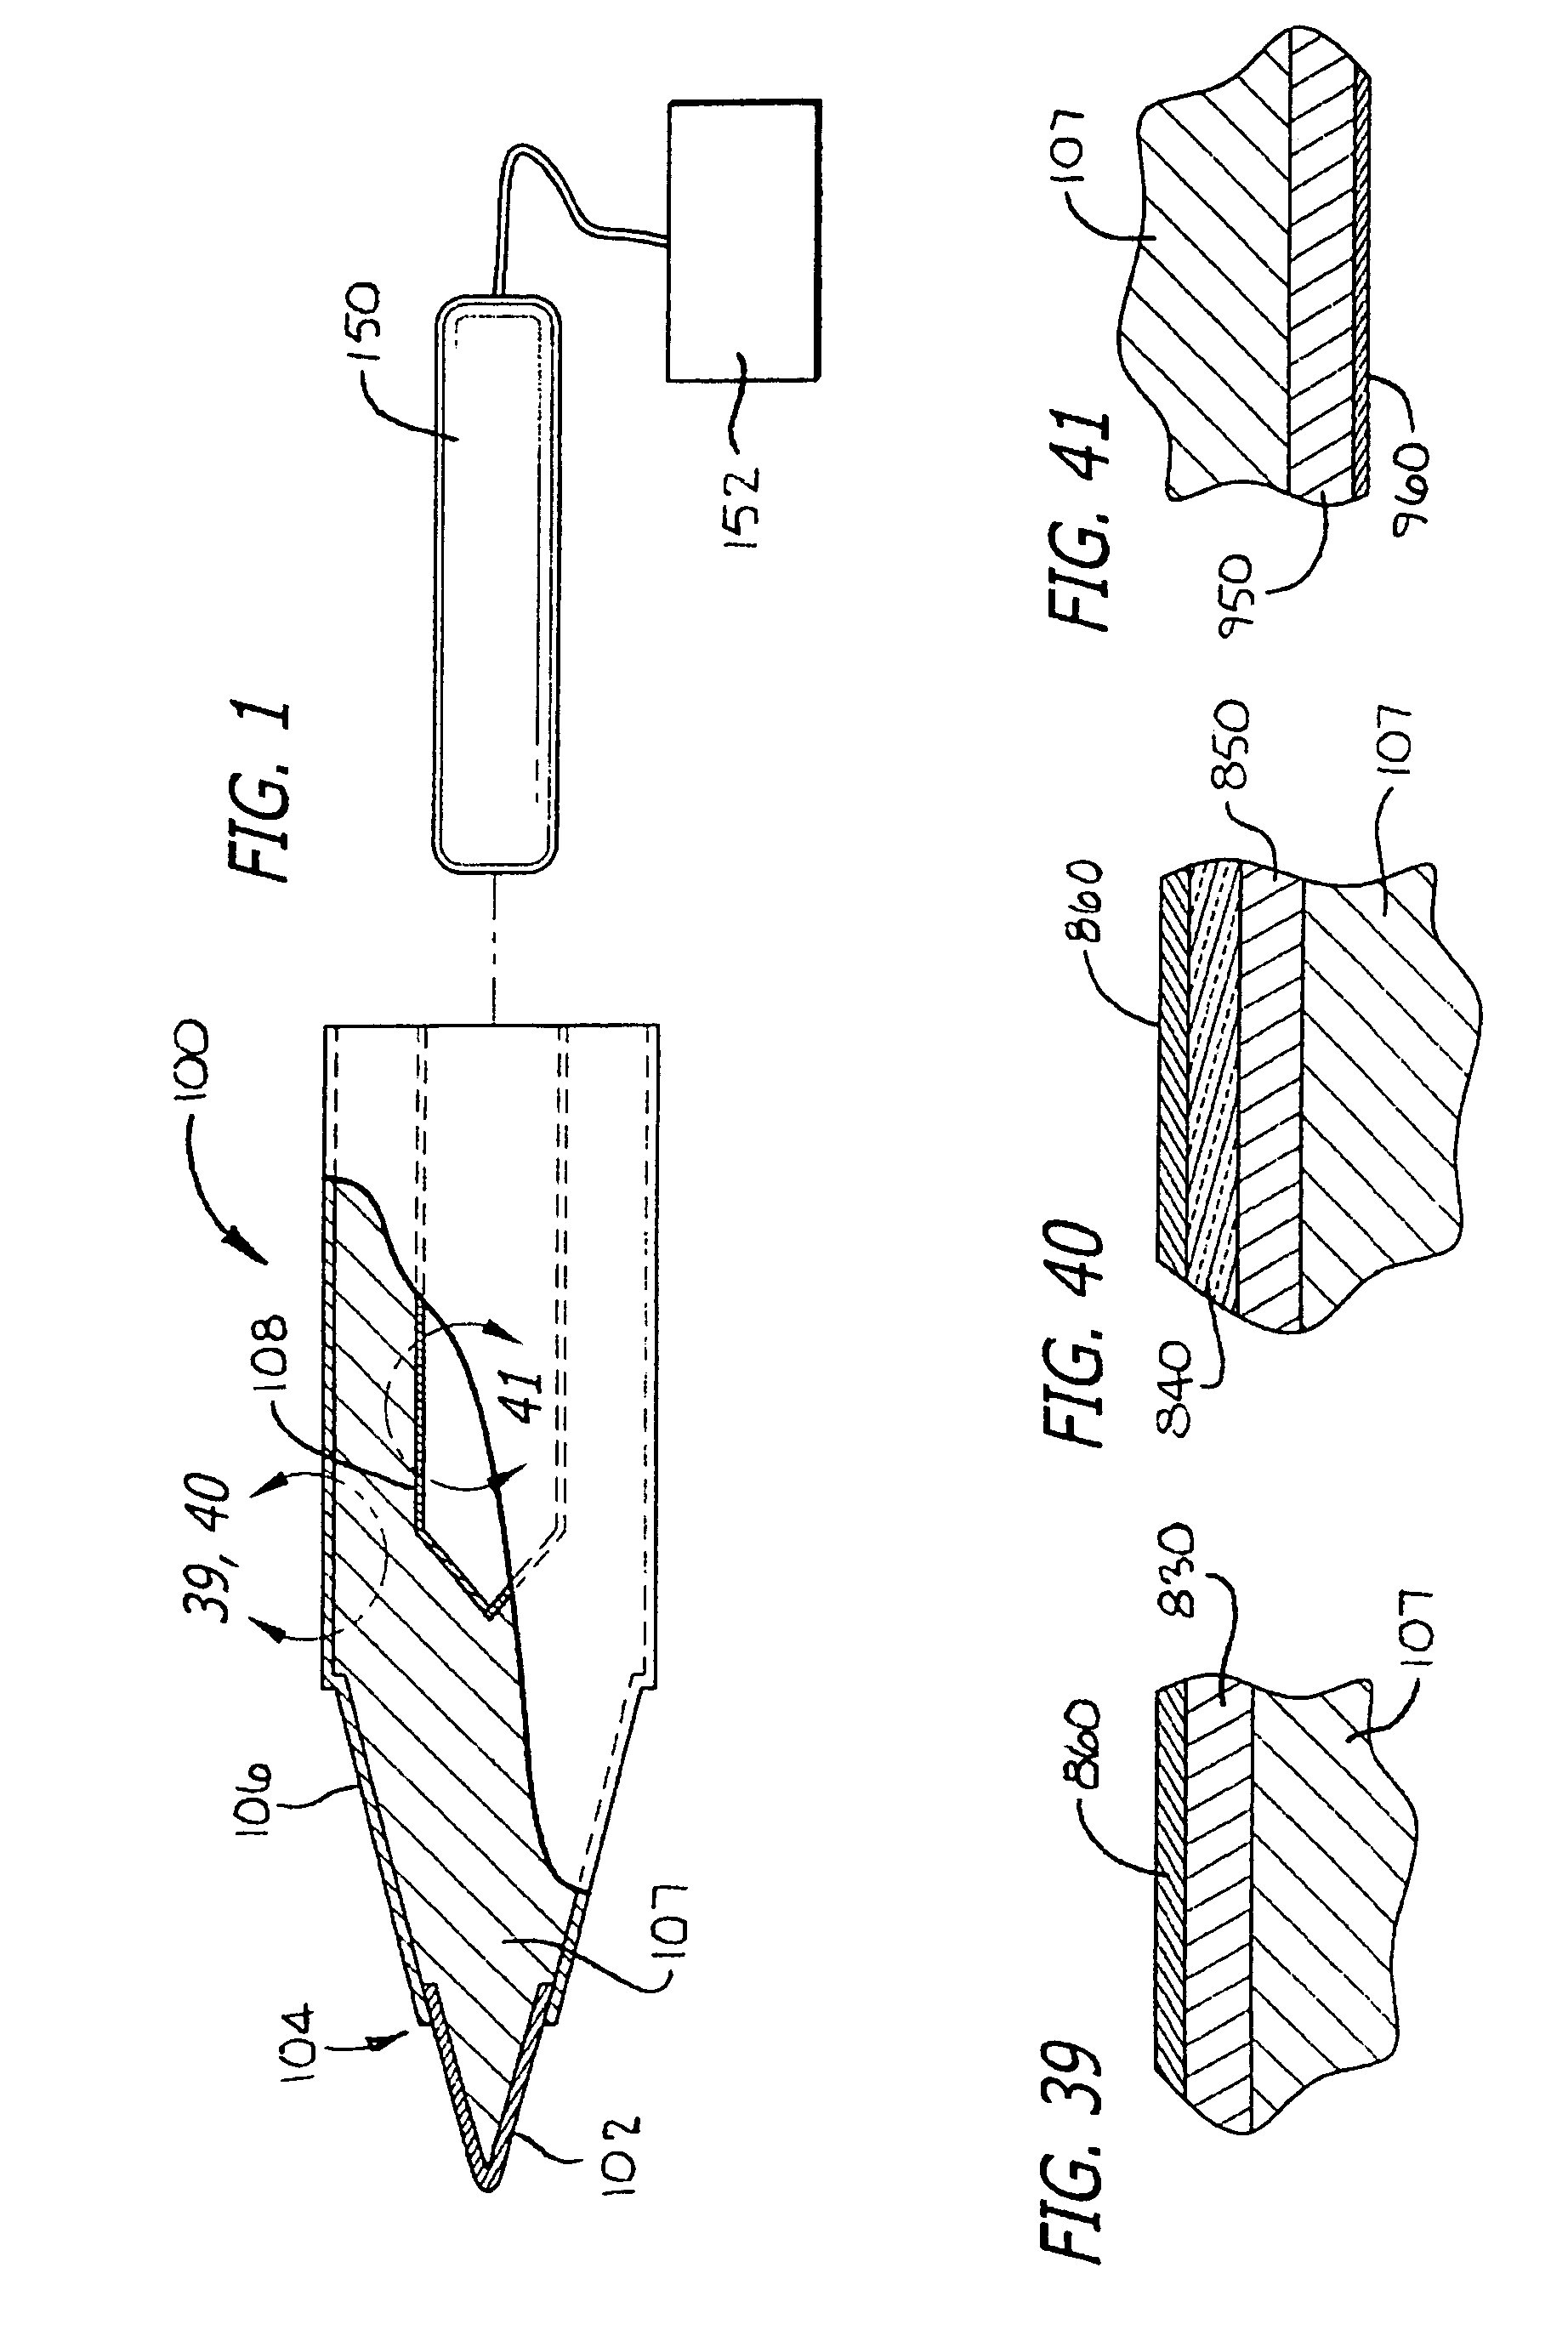 Soldering iron tip with metal particle sintered member connected to heat conducting core